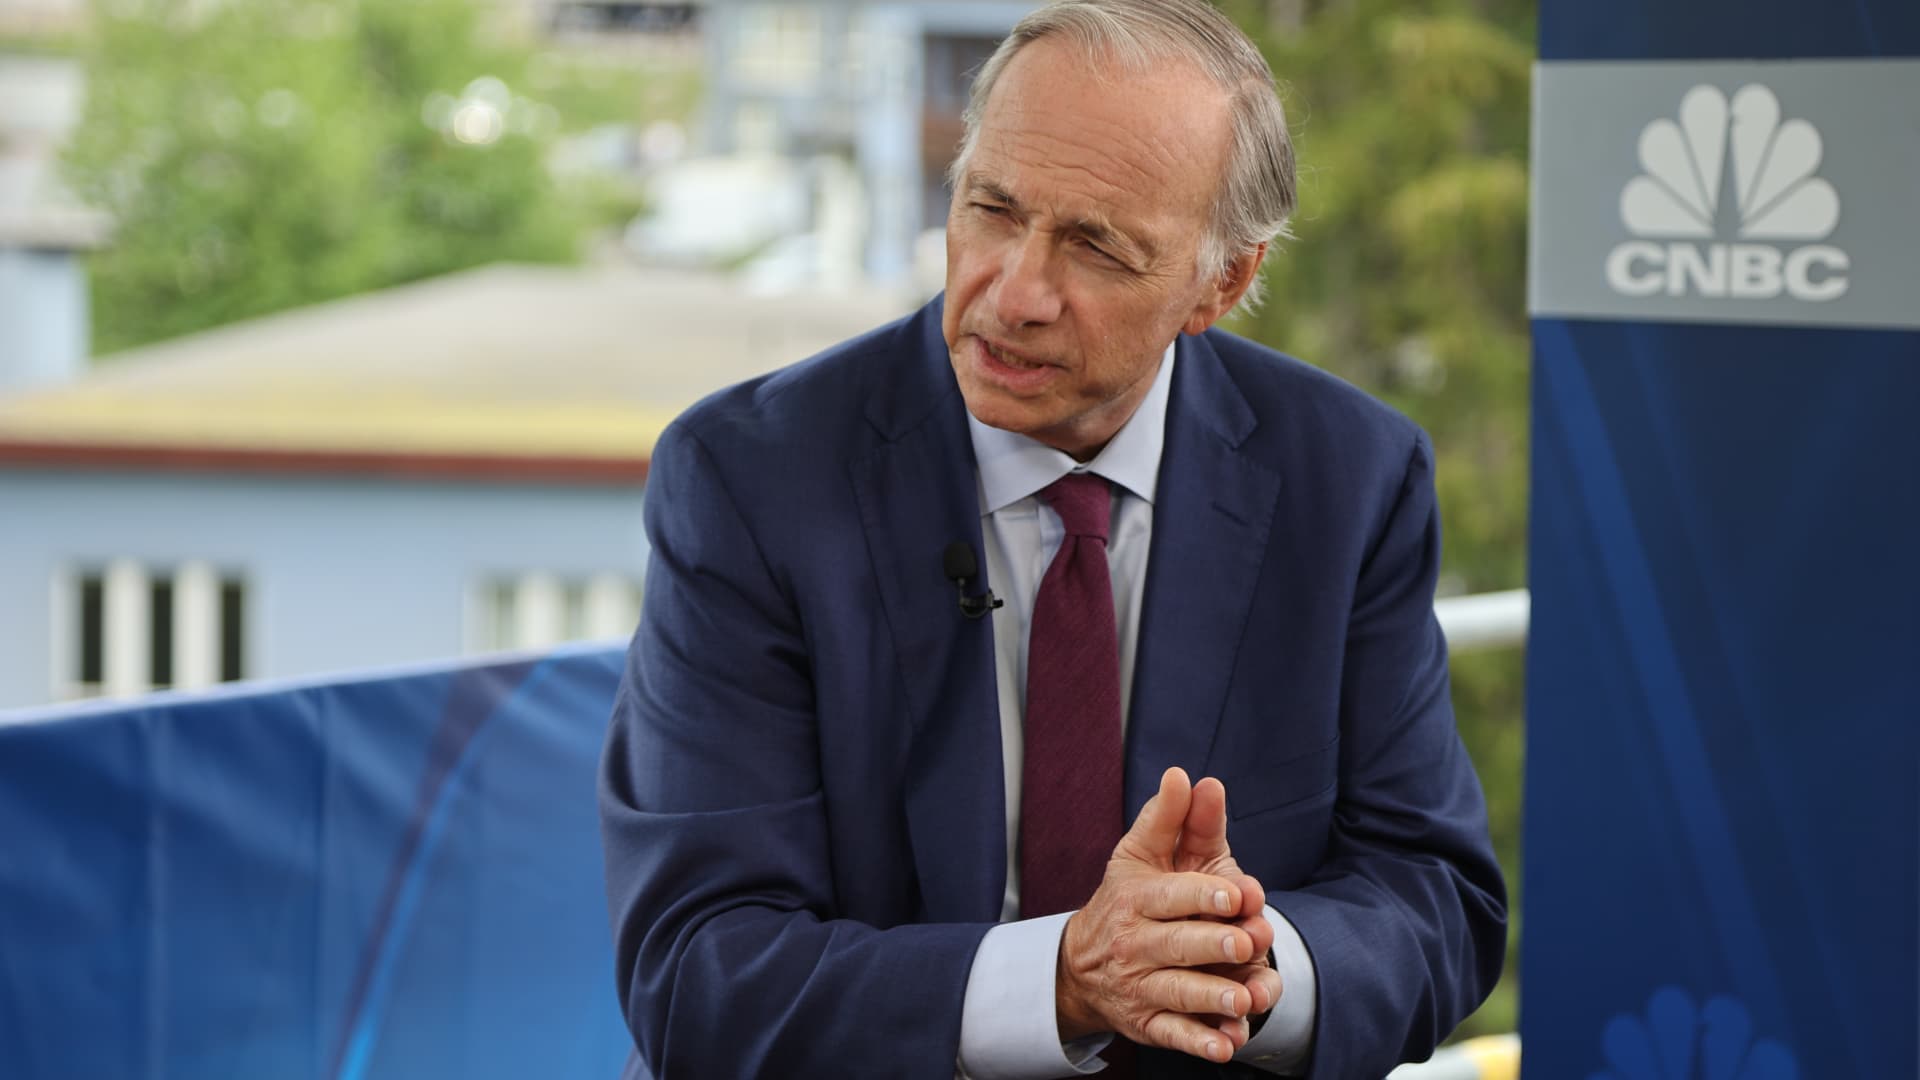 Dalio is right to short Europe, strategist says: ‘The pain will go on for quite a while’